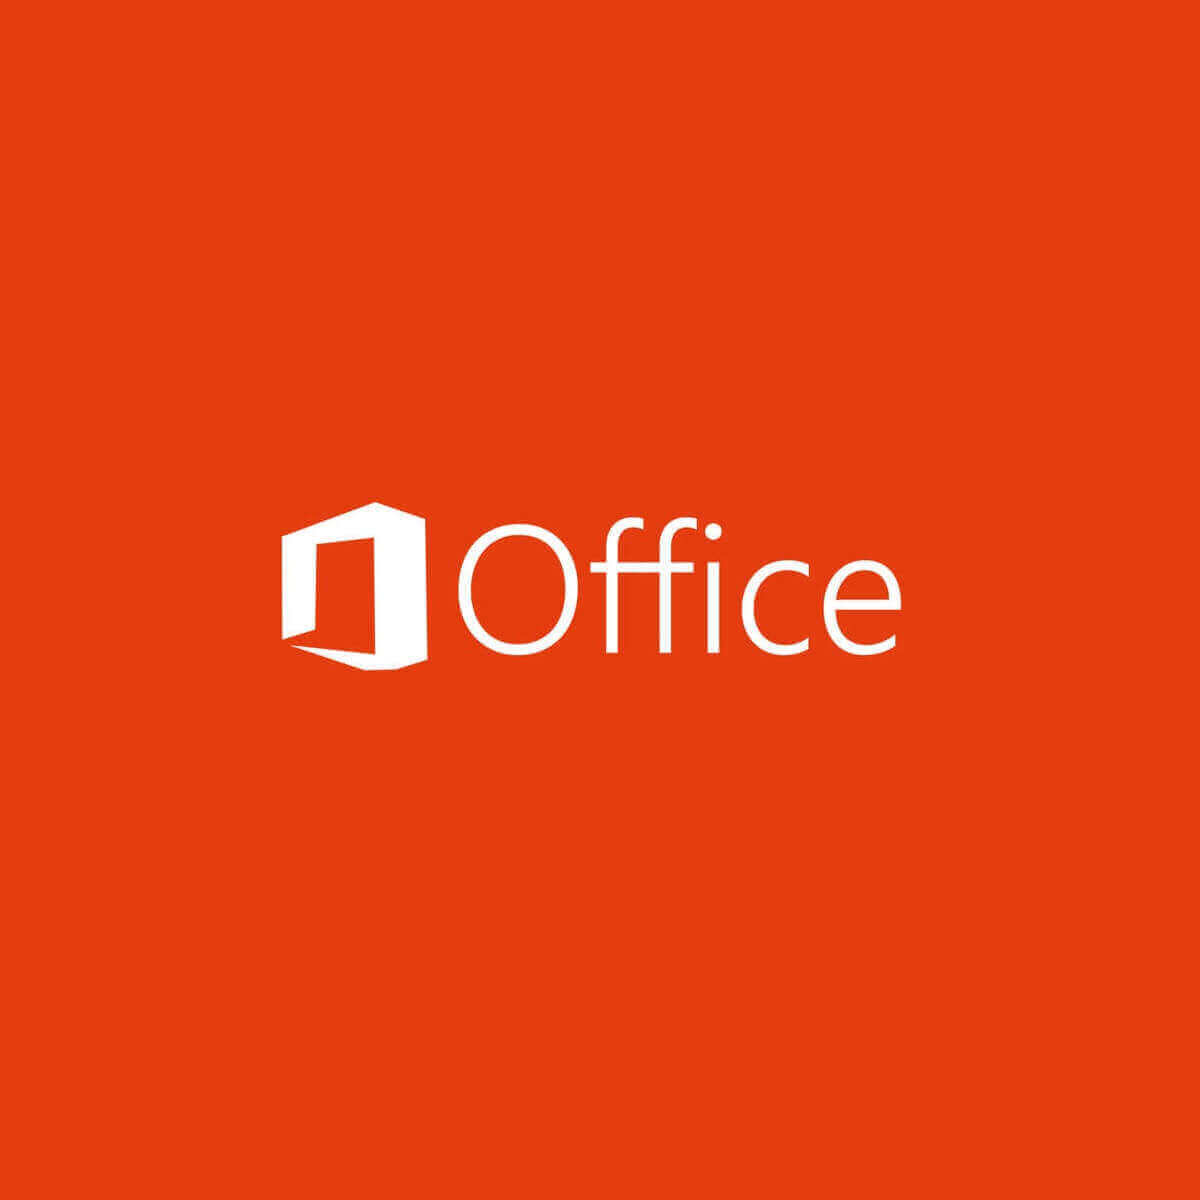 office 365 free download for windows 10 64 bit